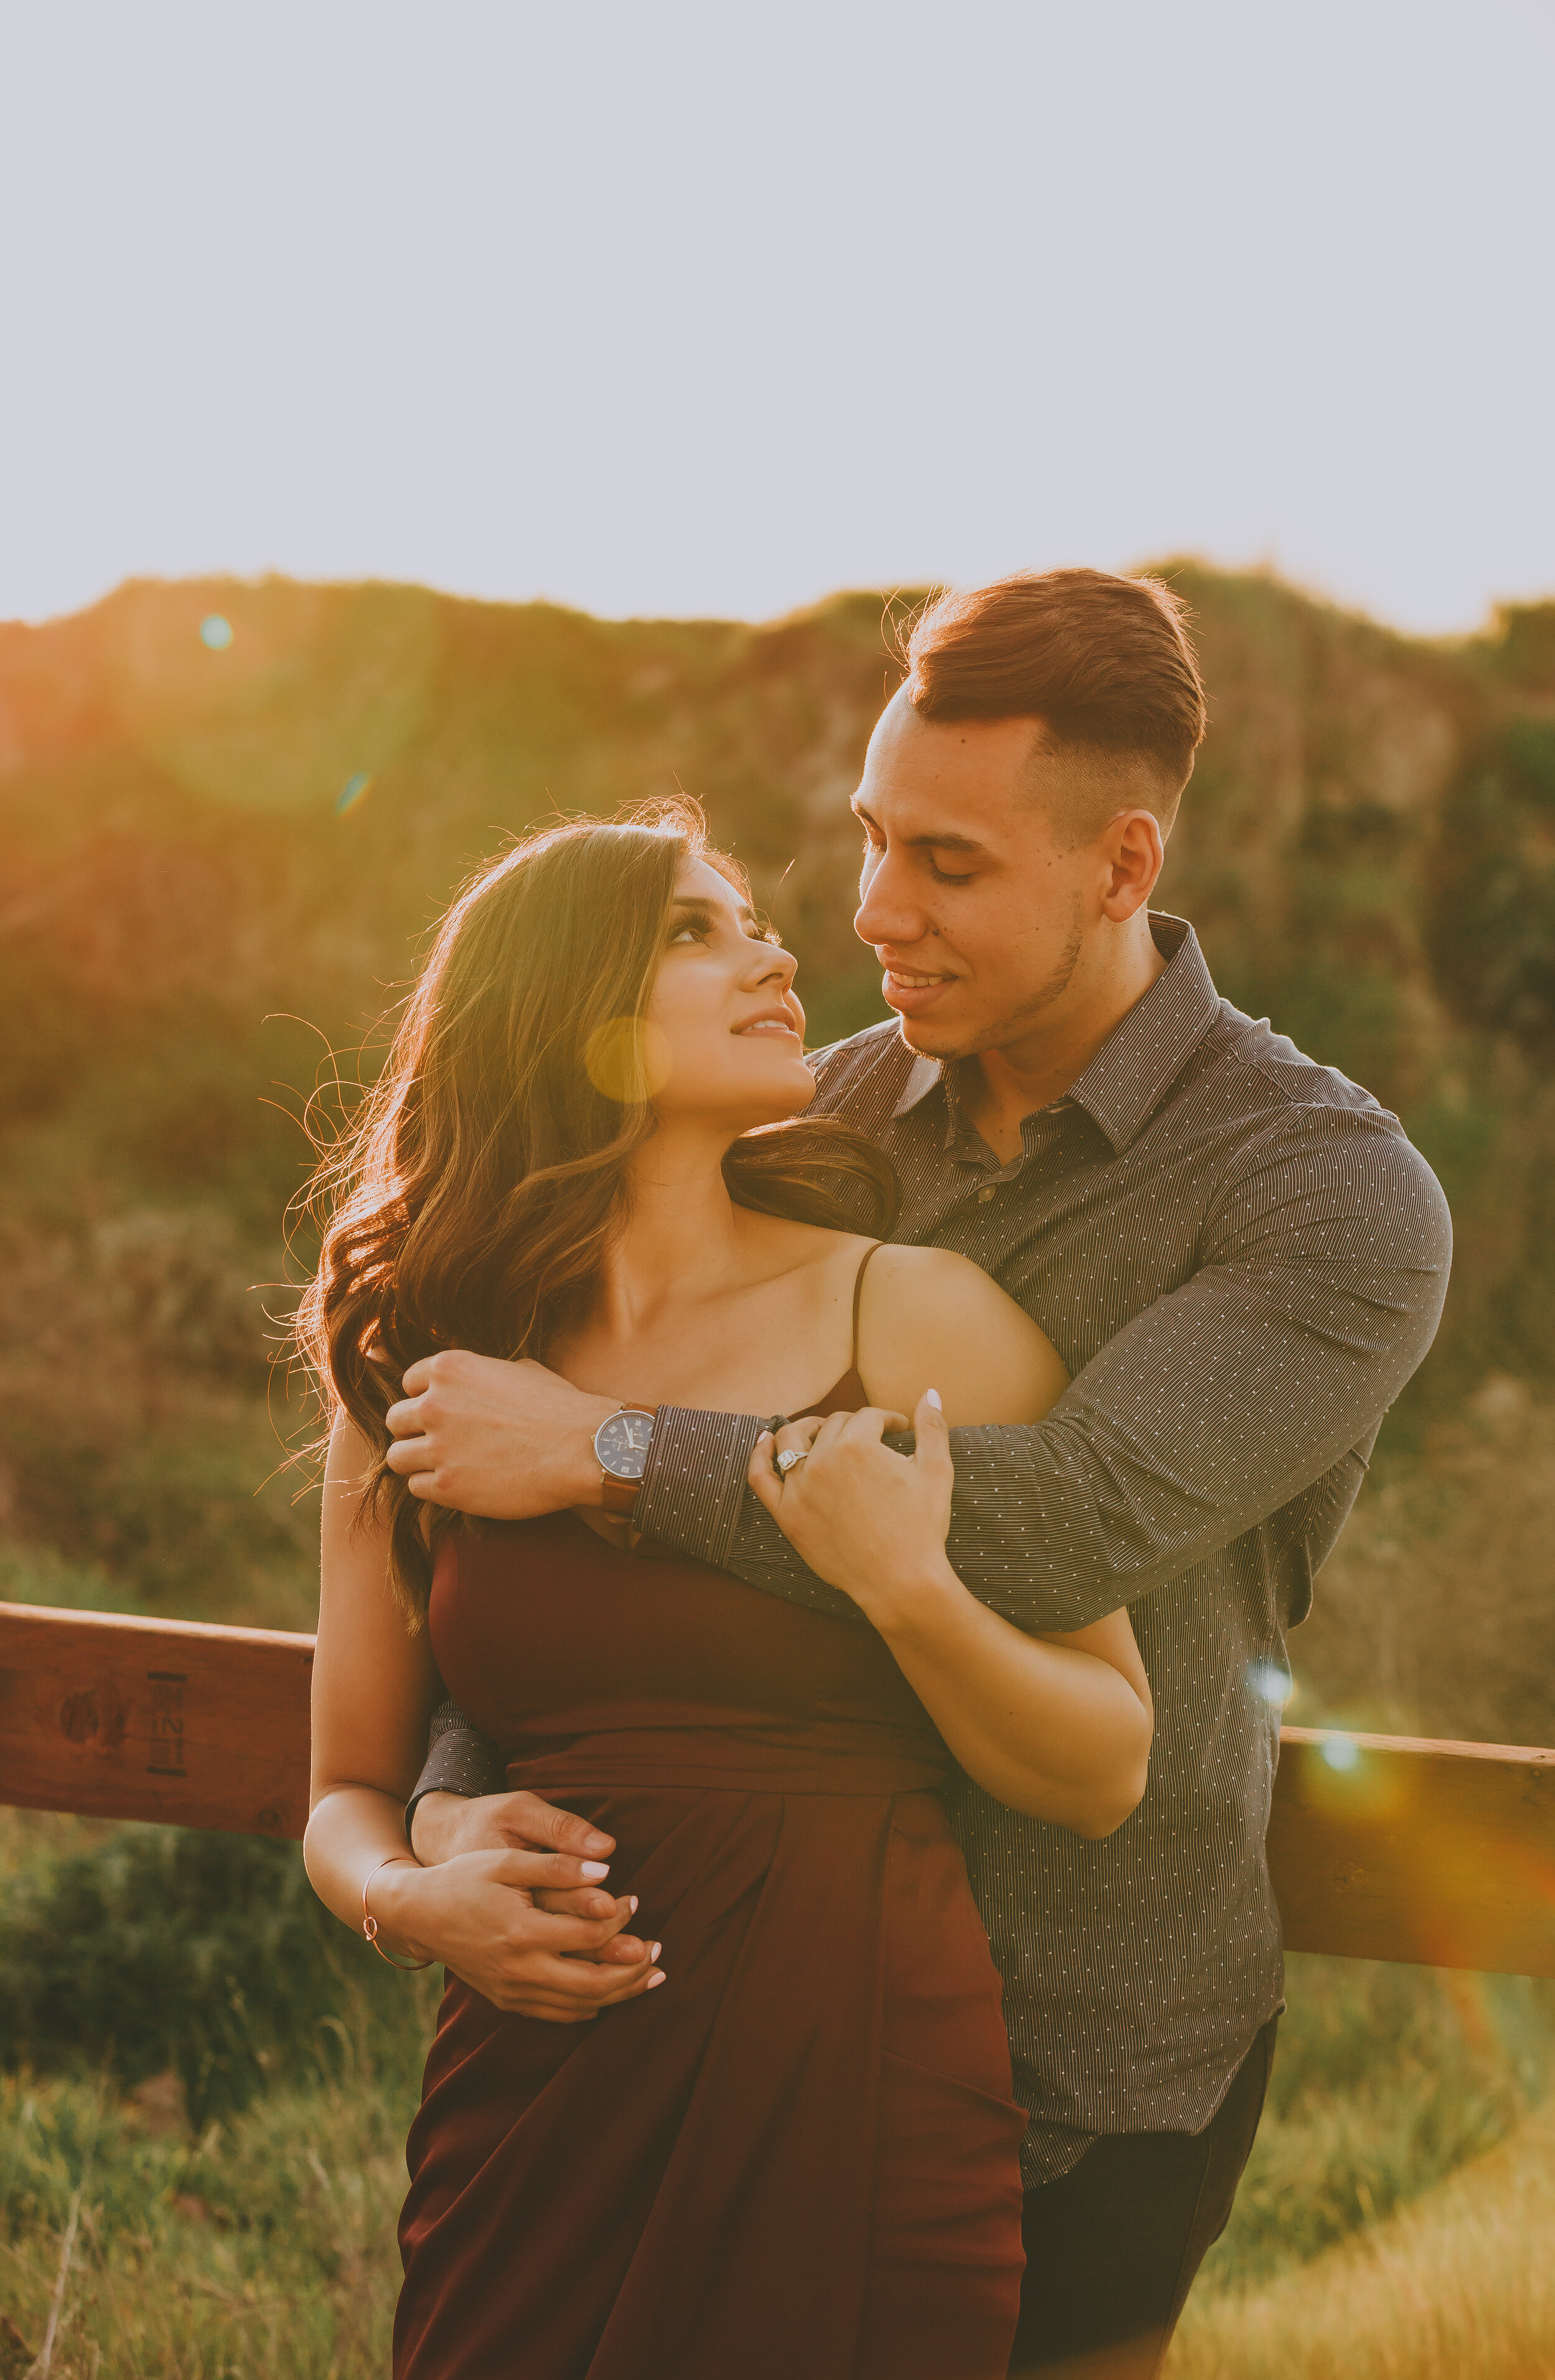 Fresno Engagament Photos - The Clausen Gallery - Samantha and Jesus-31.jpg